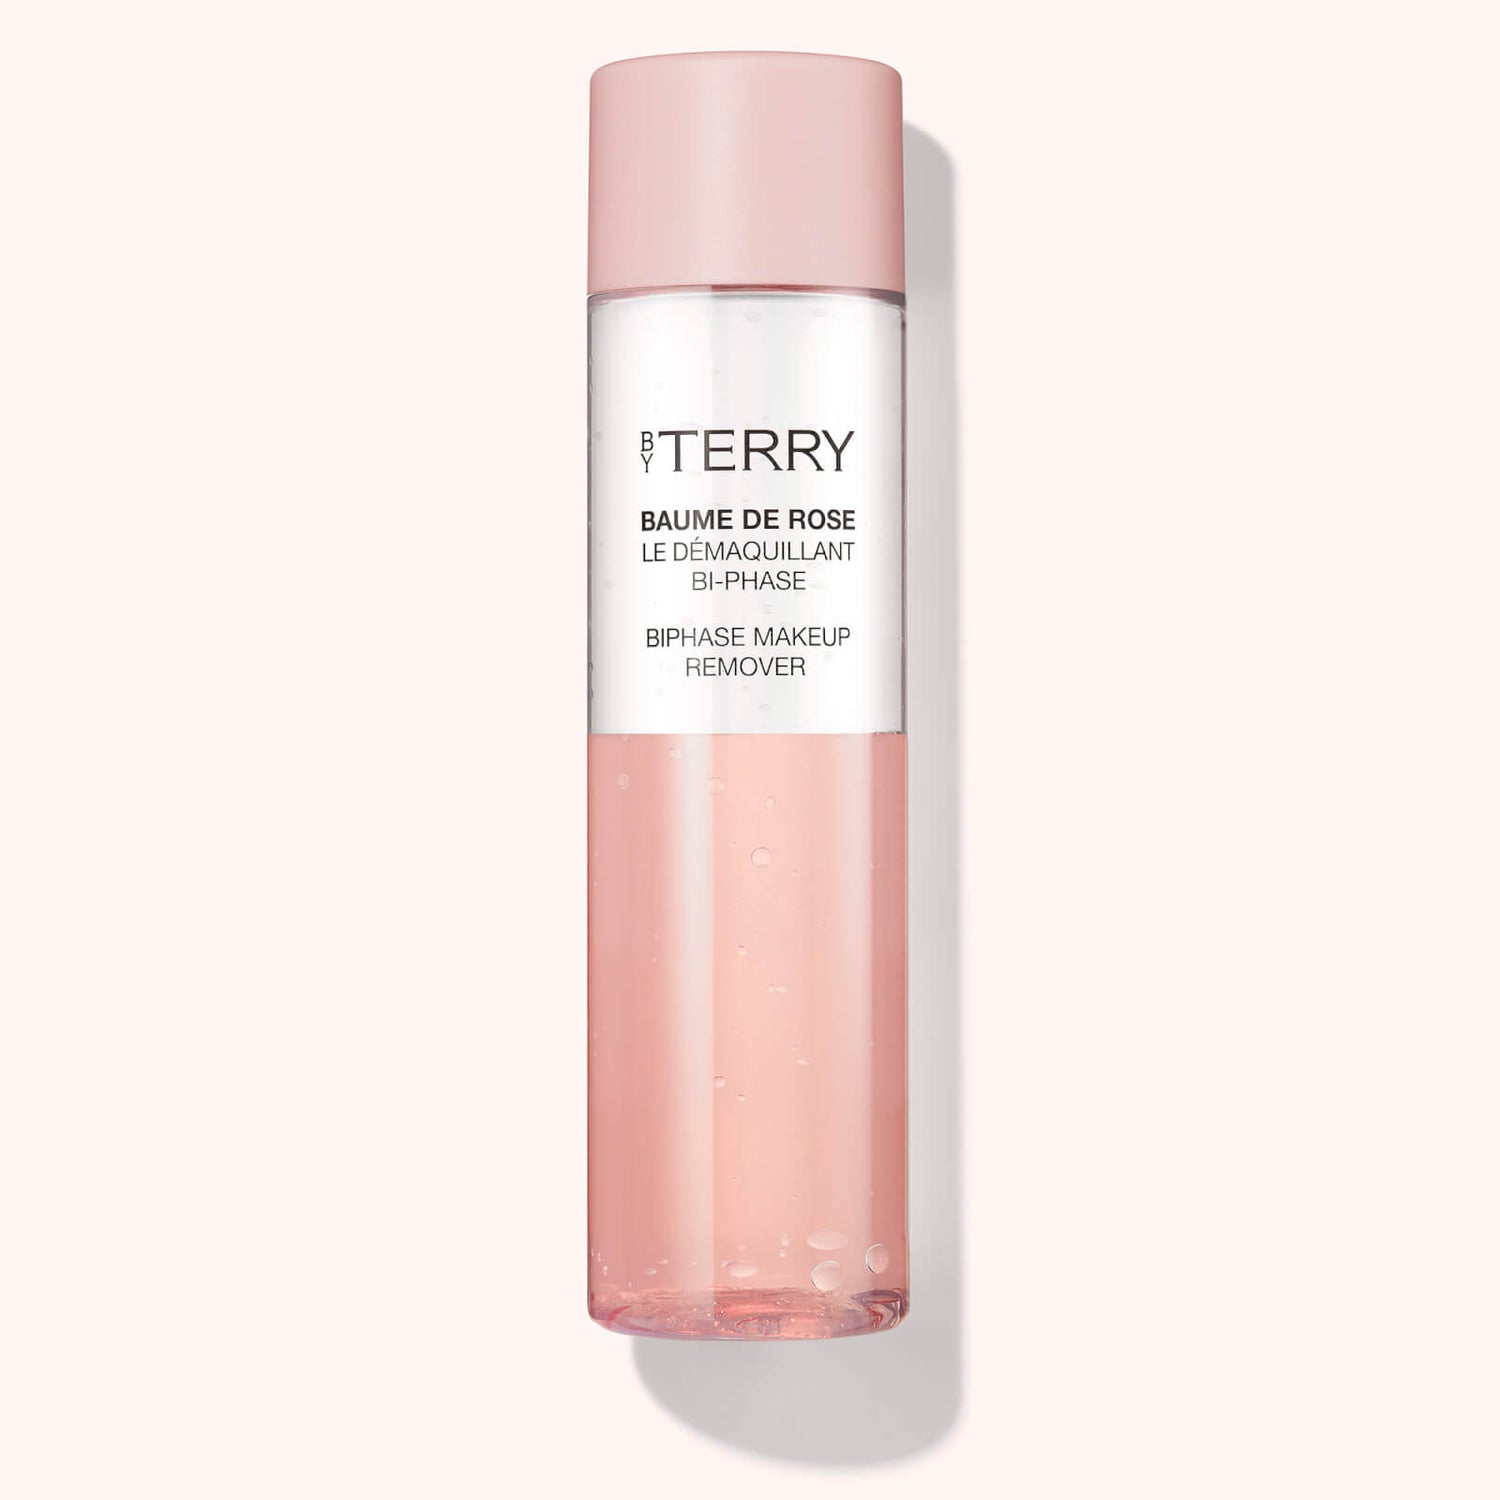 BY TERRY Baume de Rose BiPhase Makeup Remover 200 ml.